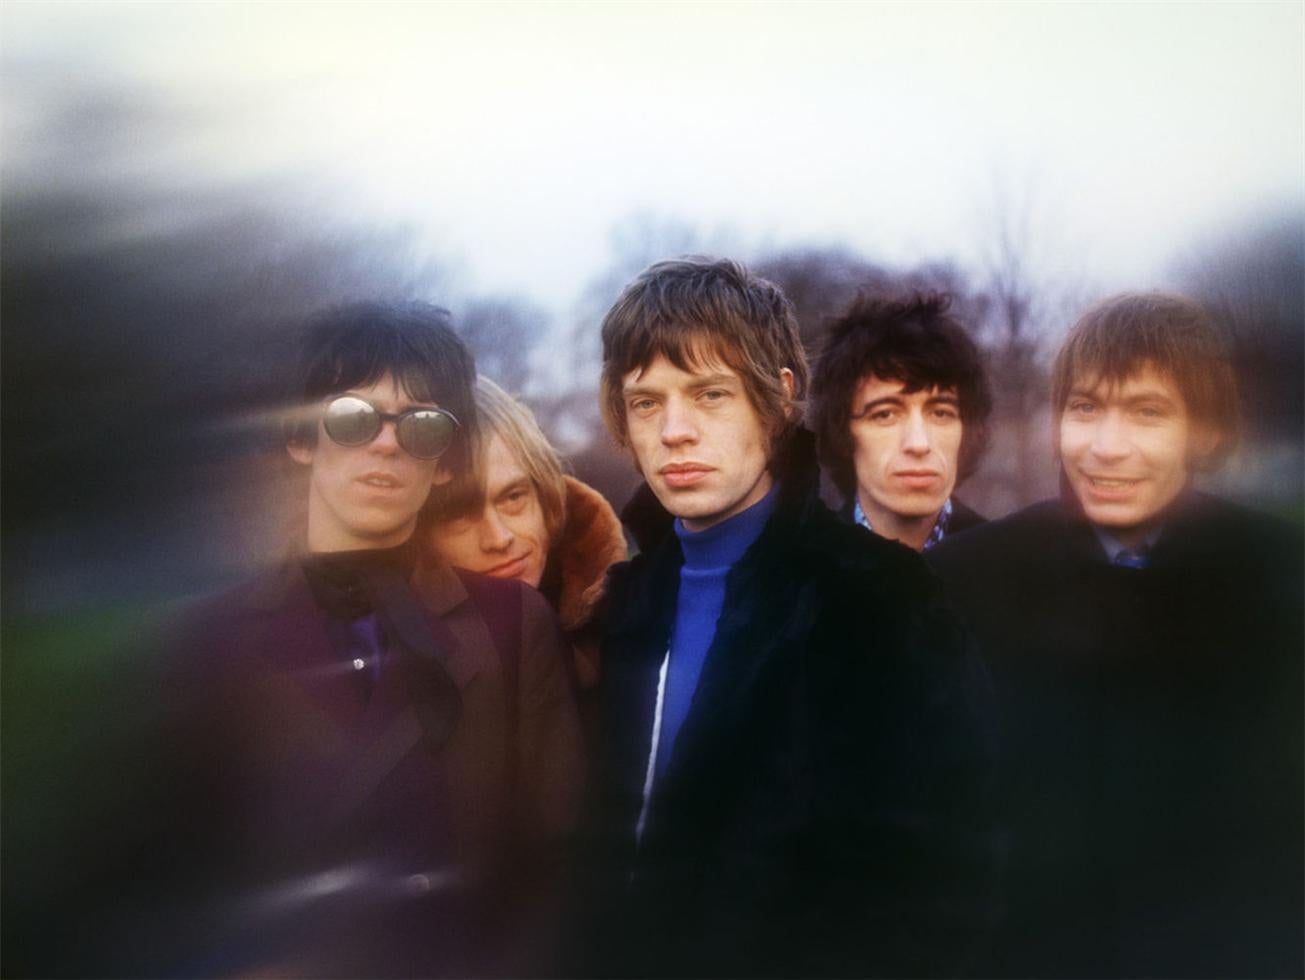 Gered Mankowitz Color Photograph - The Rolling Stones "Beyond the Buttons" 